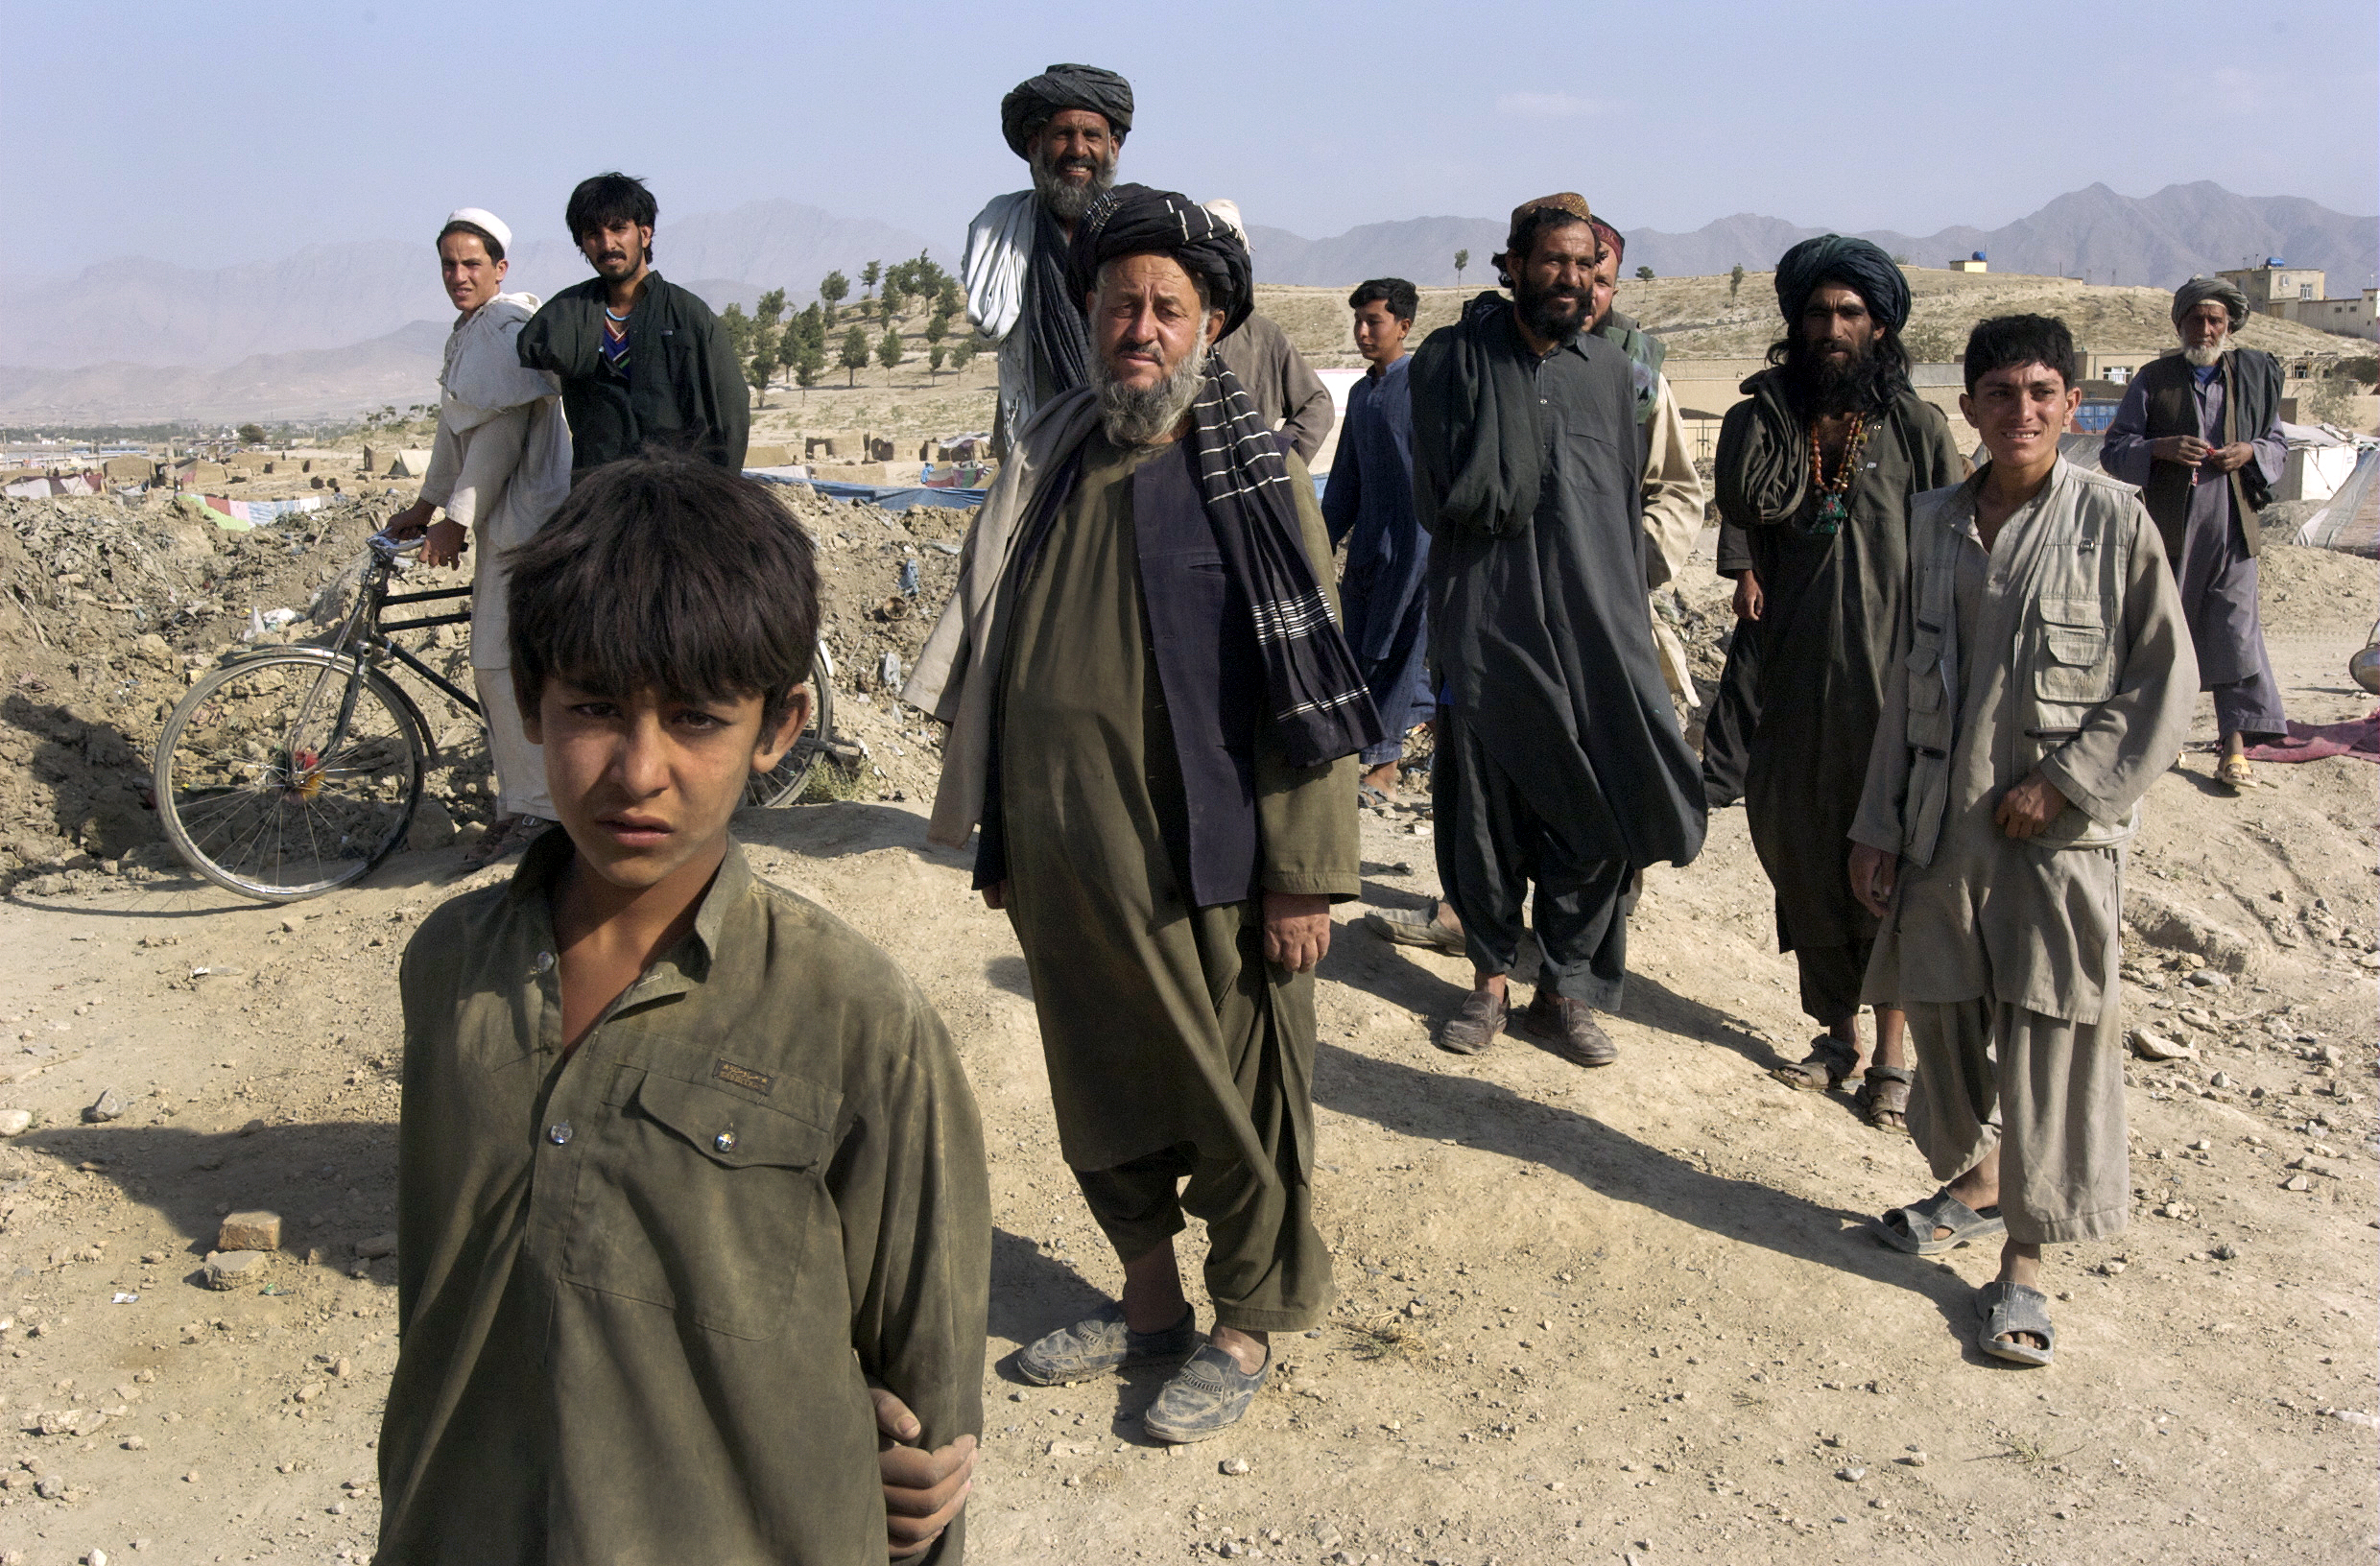 A group of Kuchi nomads walk through their camp in Bagram, Afghanistan.